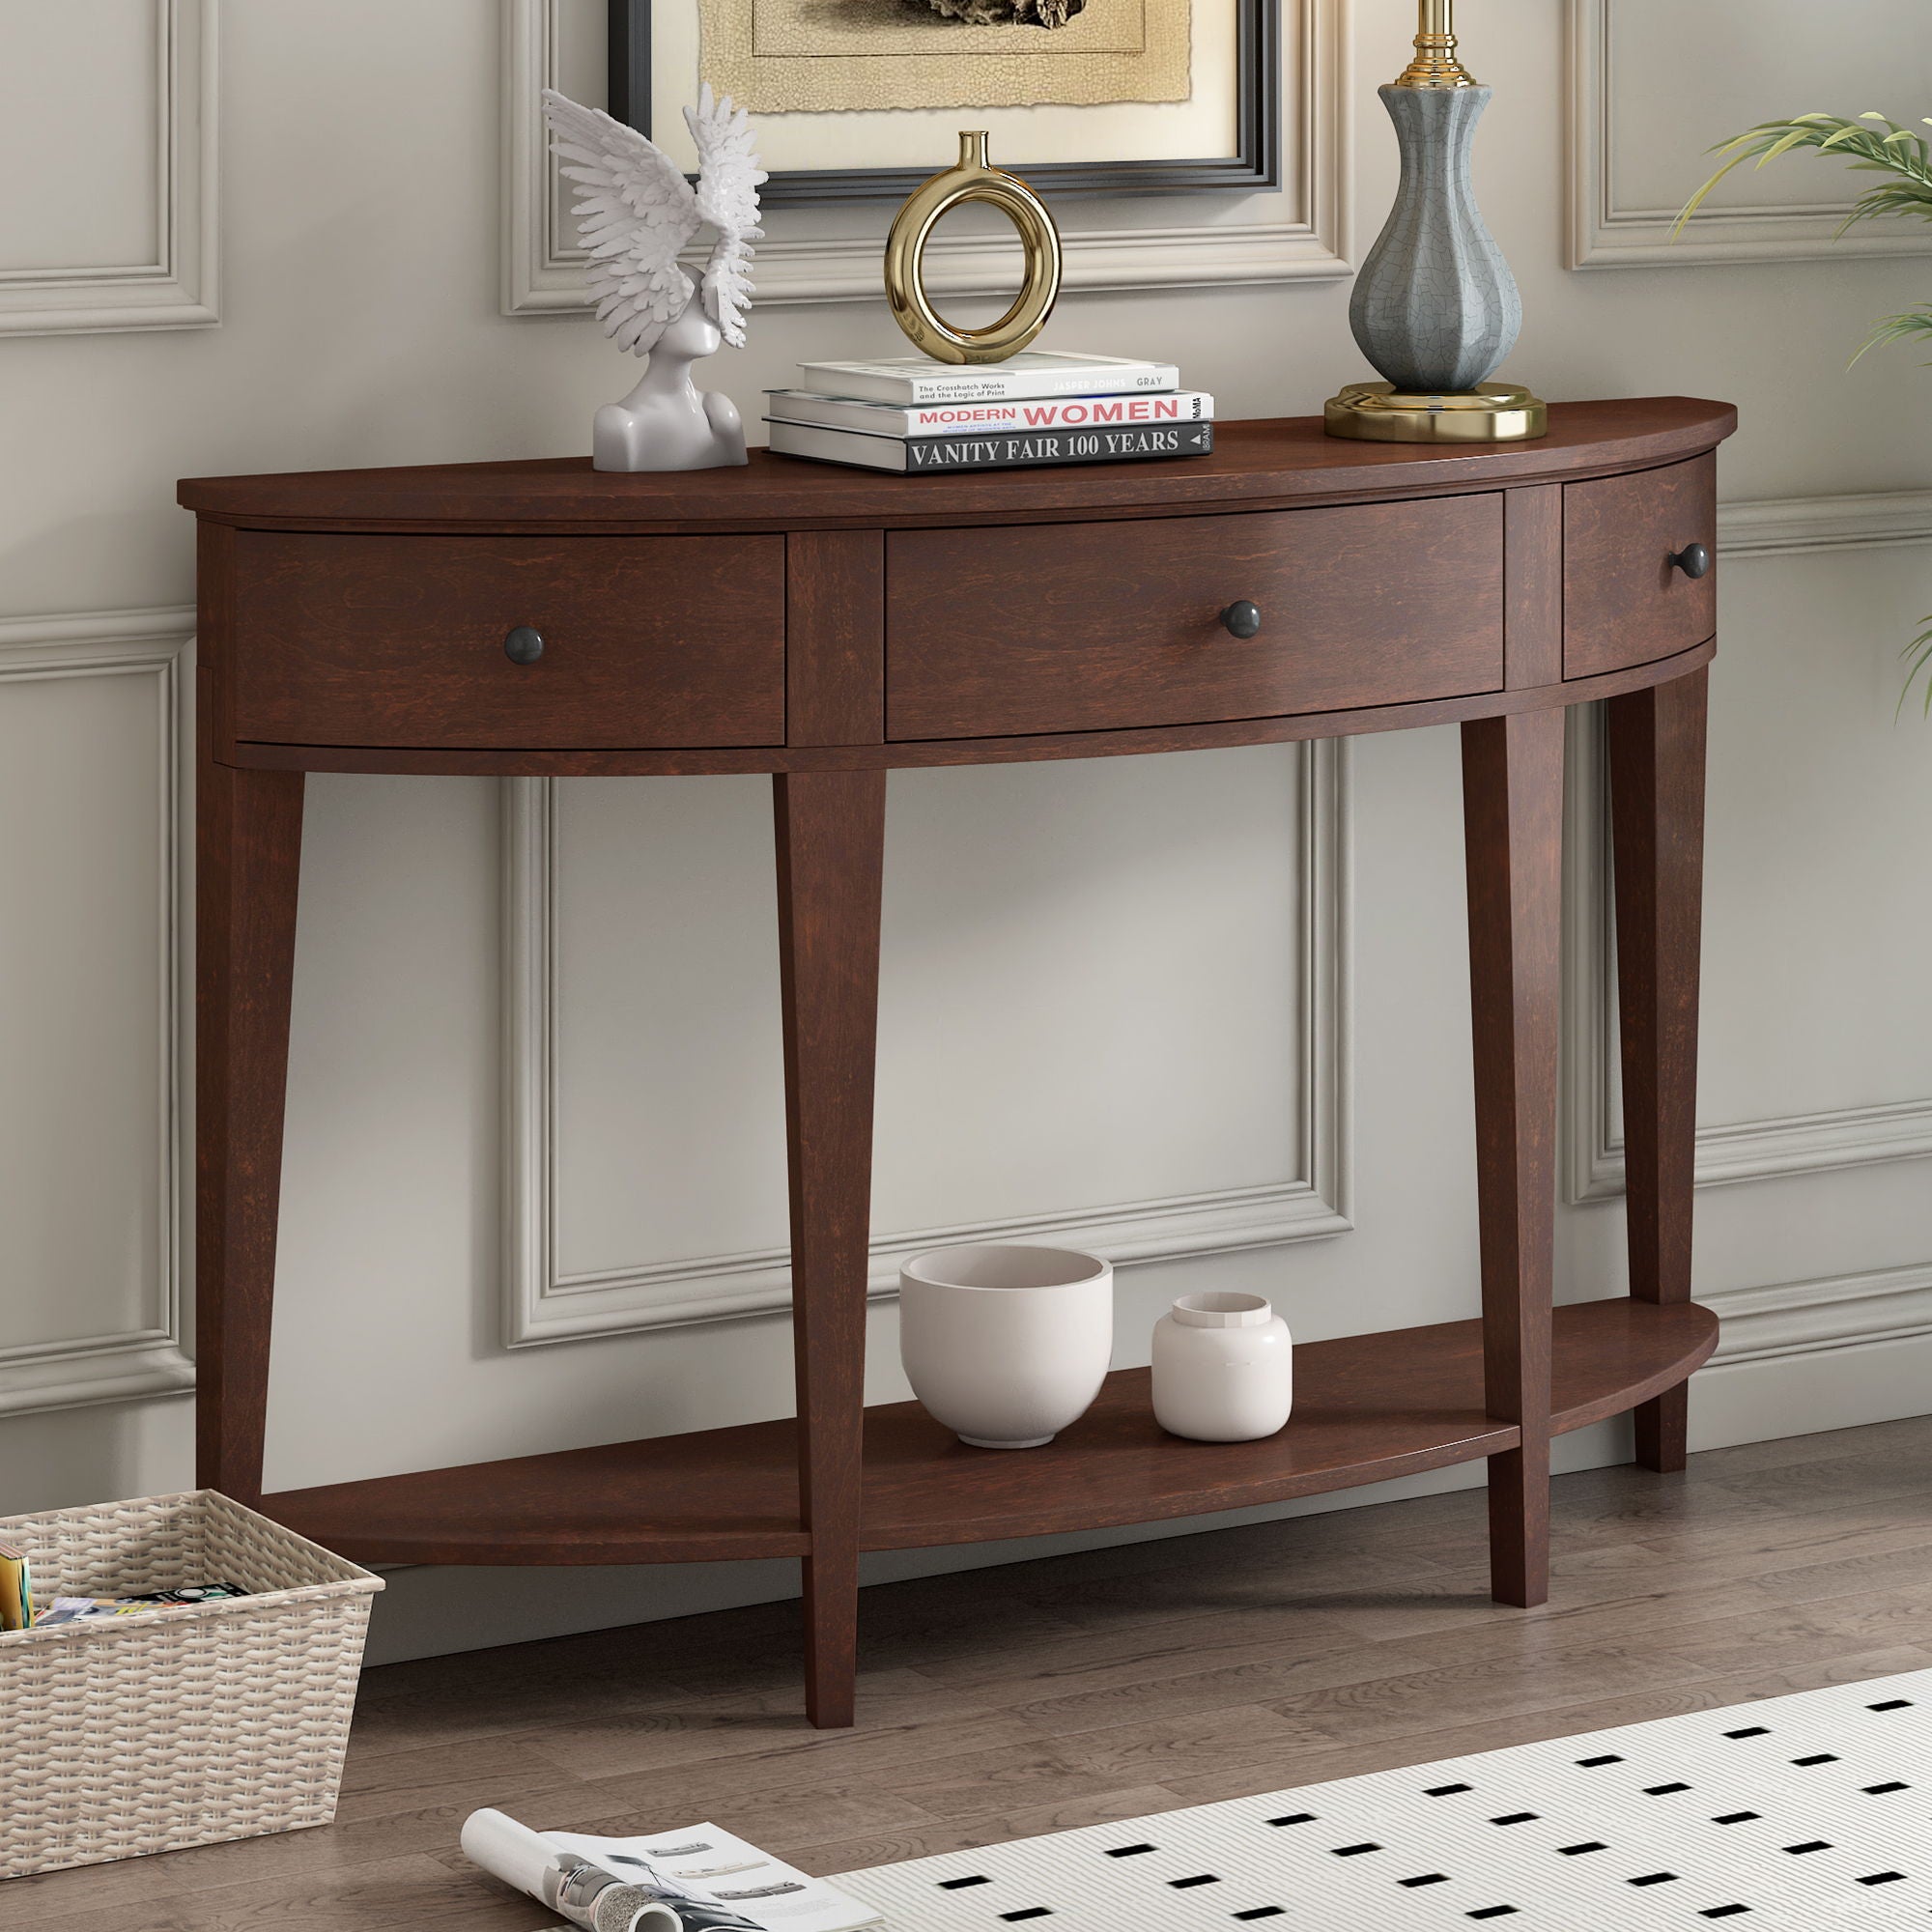 U-Style Modern Curved Console Table Sofa Table With 3 Drawers And 1 Shelf For Hallway, Entryway, Living Room - Espresso